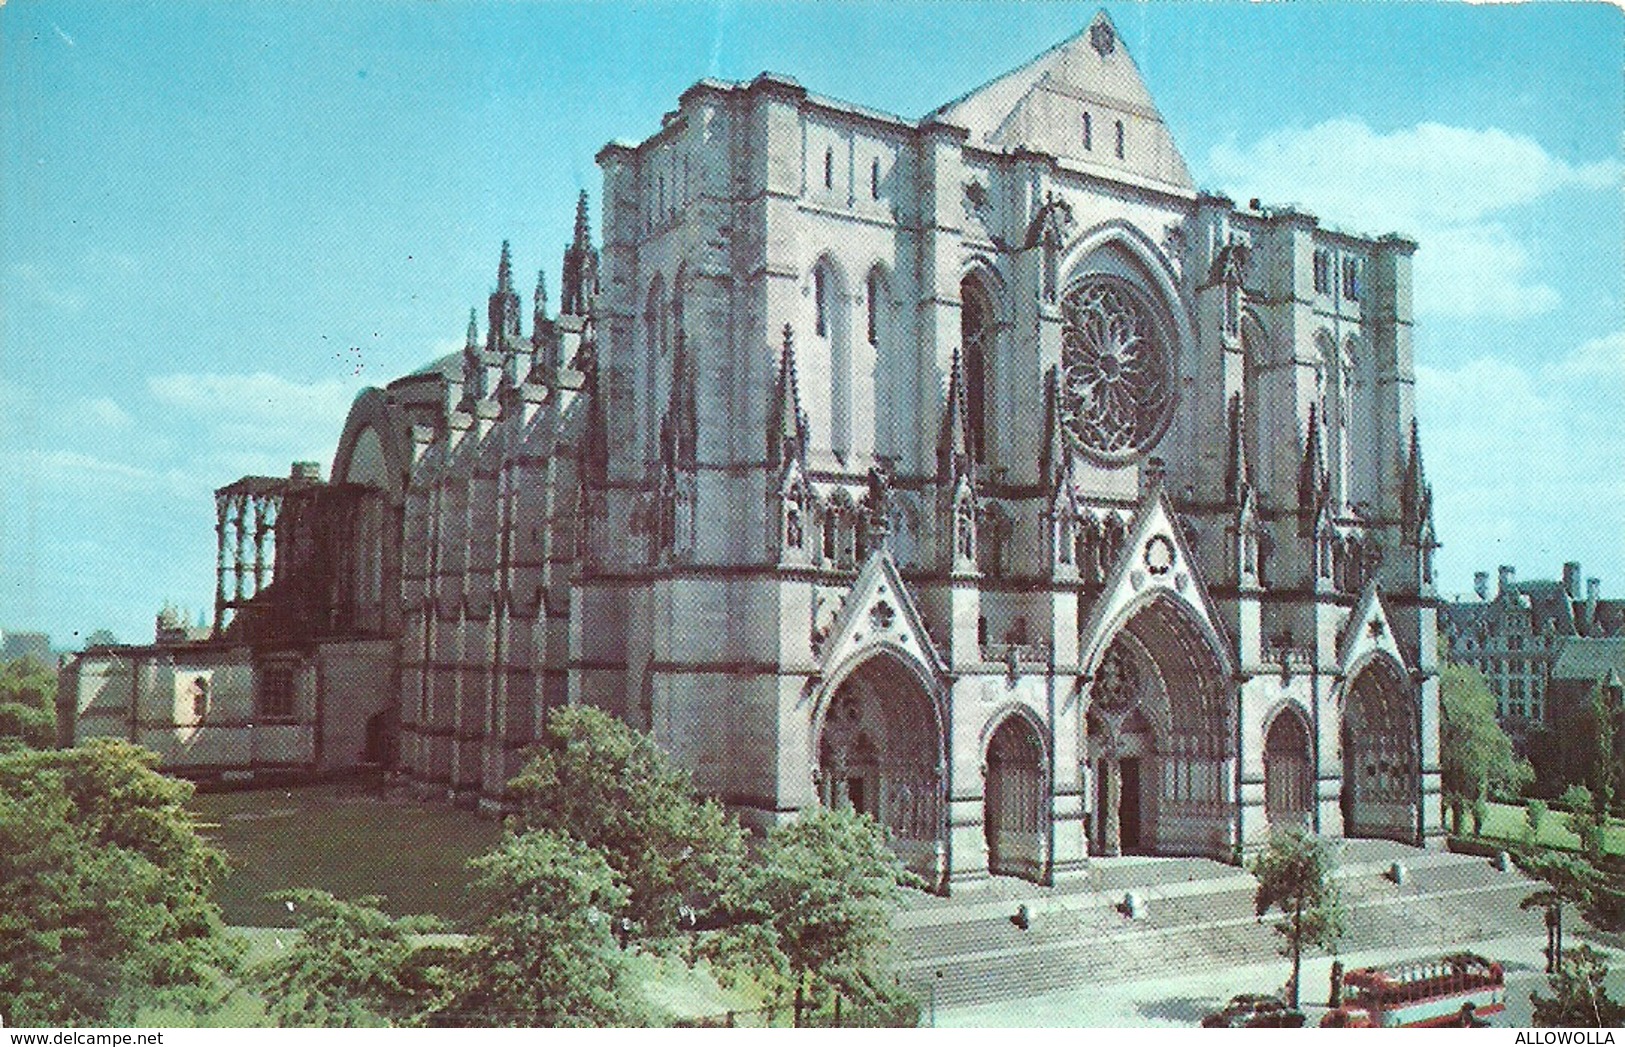 986 "THE CATHEDRAL OF ST. JOHN THE DIVINE- N.Y.  " CARTOLINA POSTALE ORIG.  NON SPED. - Églises